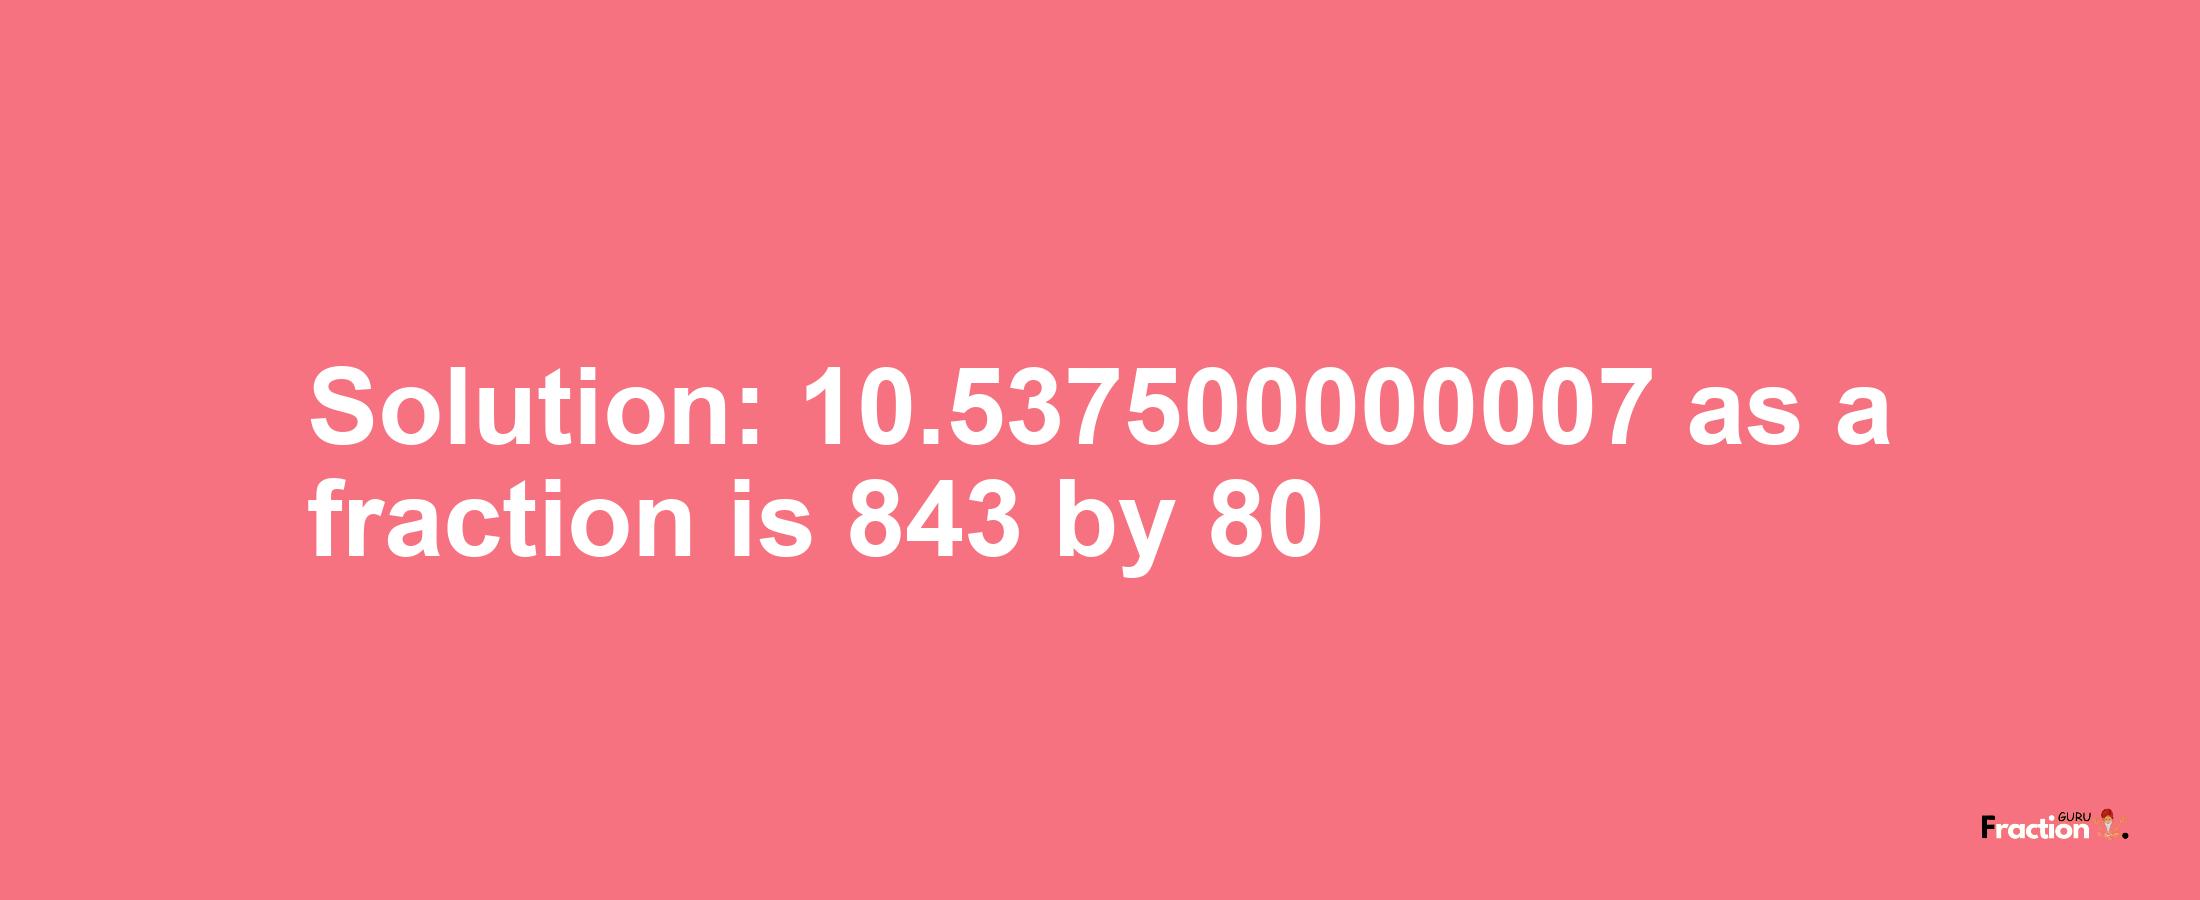 Solution:10.537500000007 as a fraction is 843/80